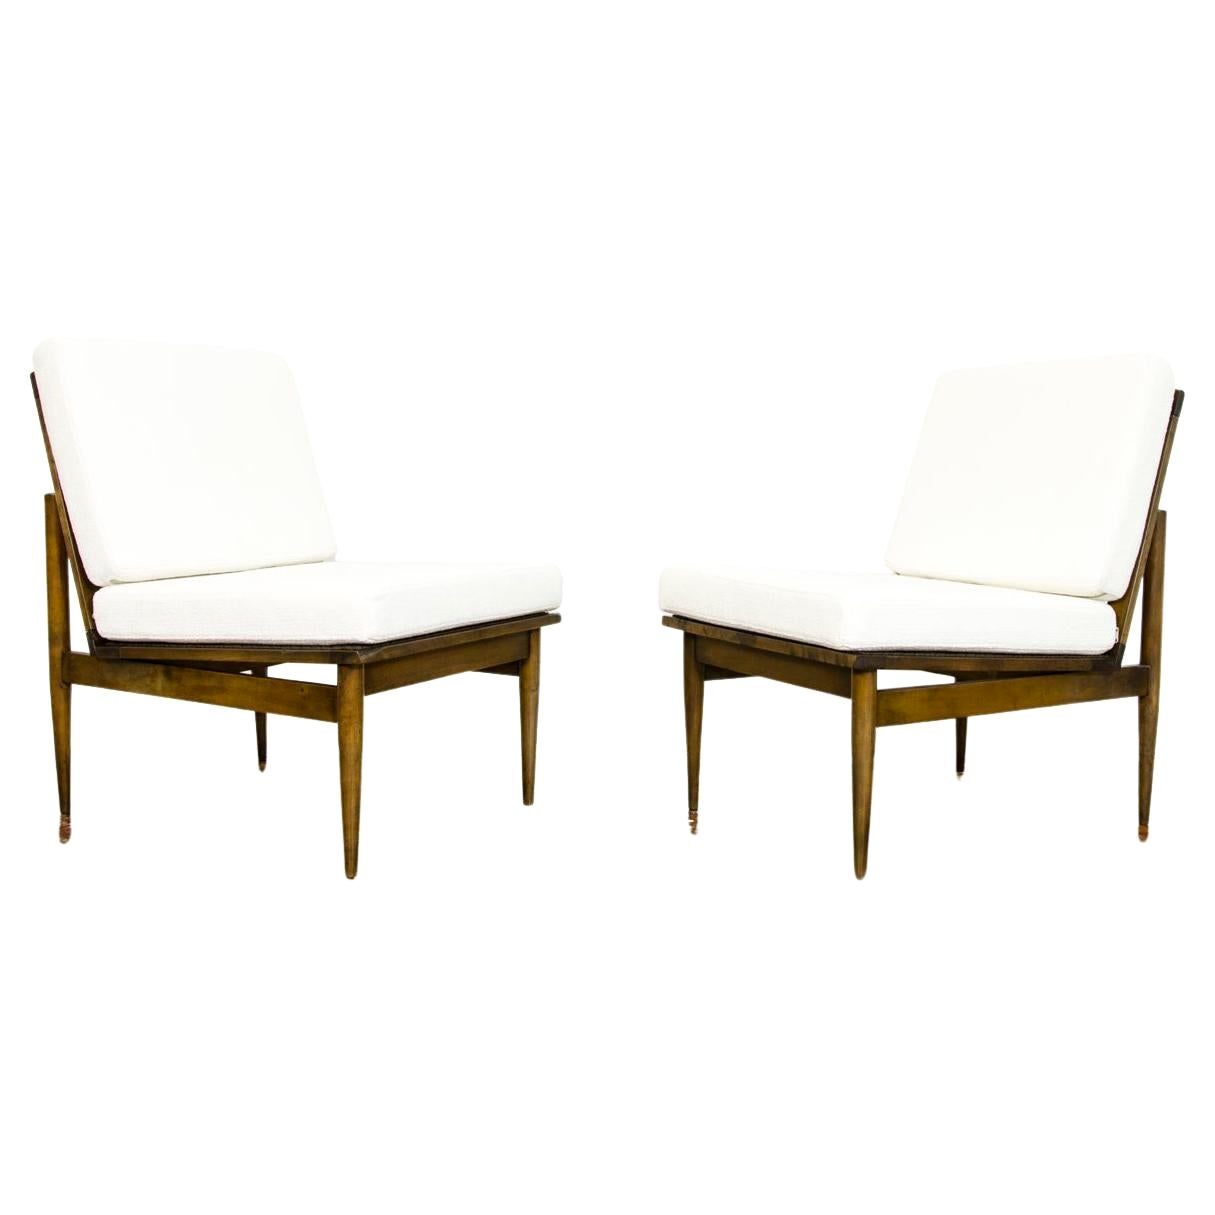 Pair of Rare White Mid-Century Lounge Chairs from Poznańskie Furniture Factories